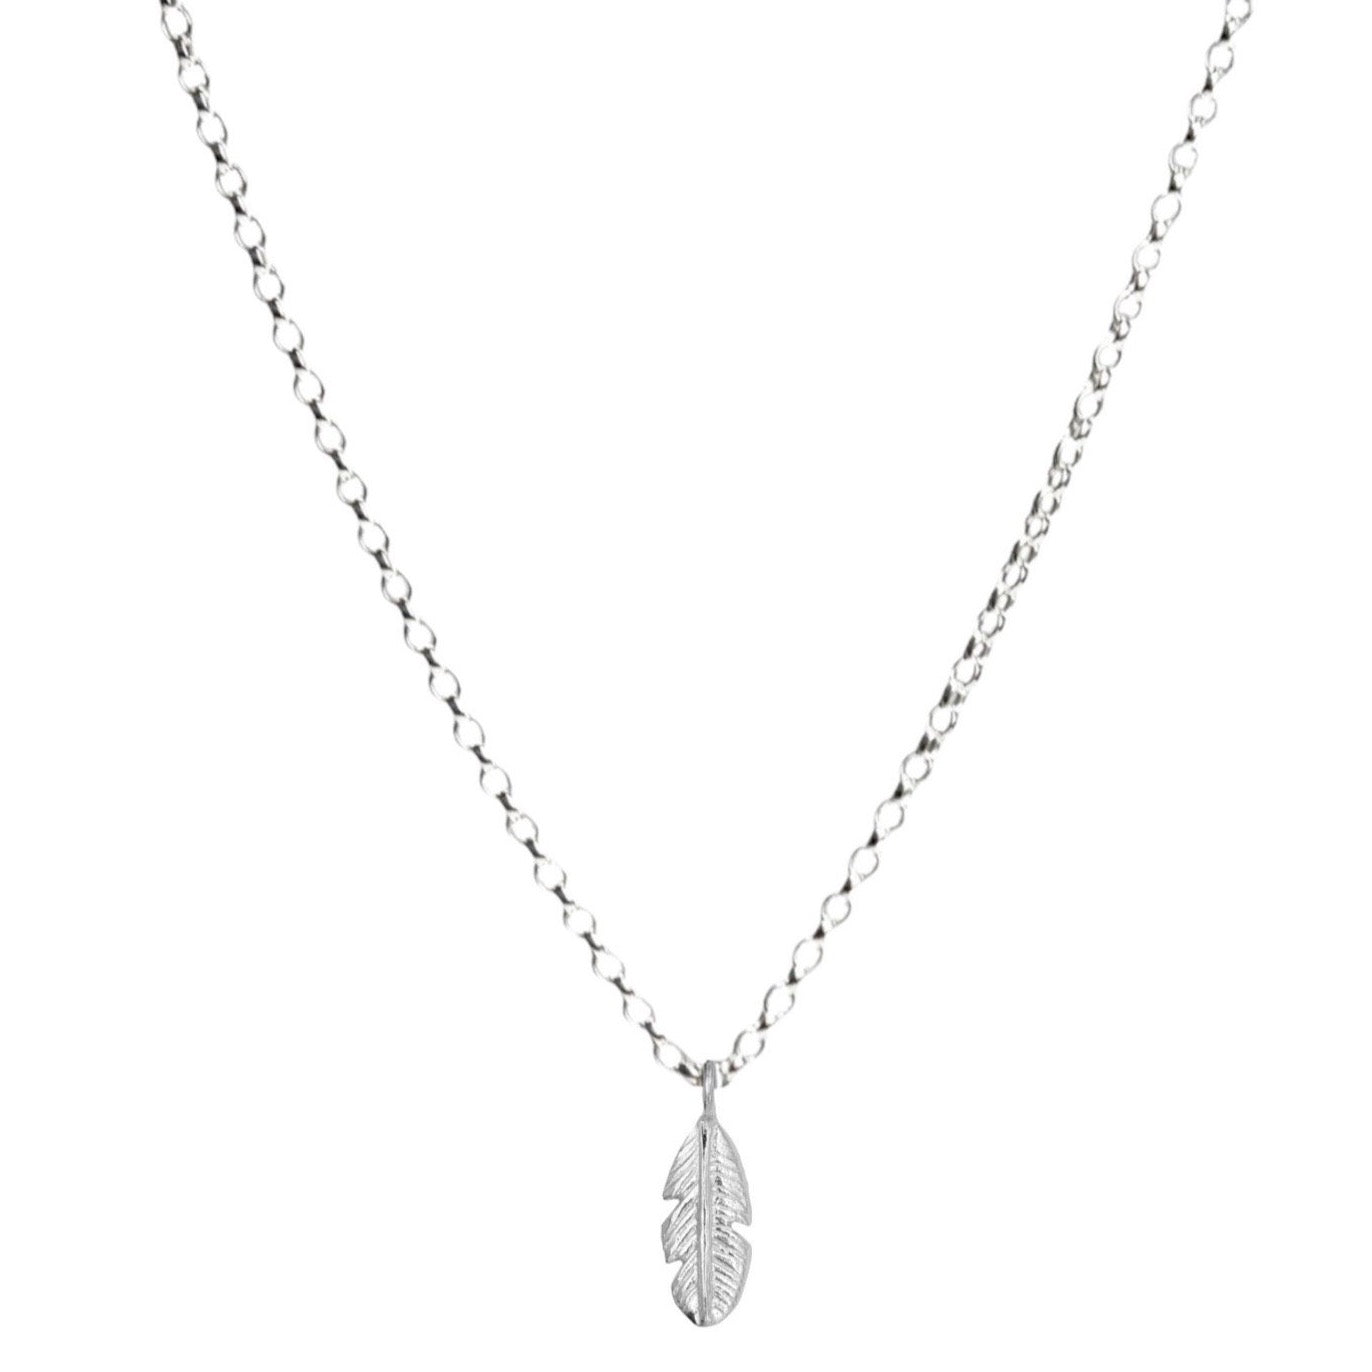 Belle & Bee Sterling silver feather necklace